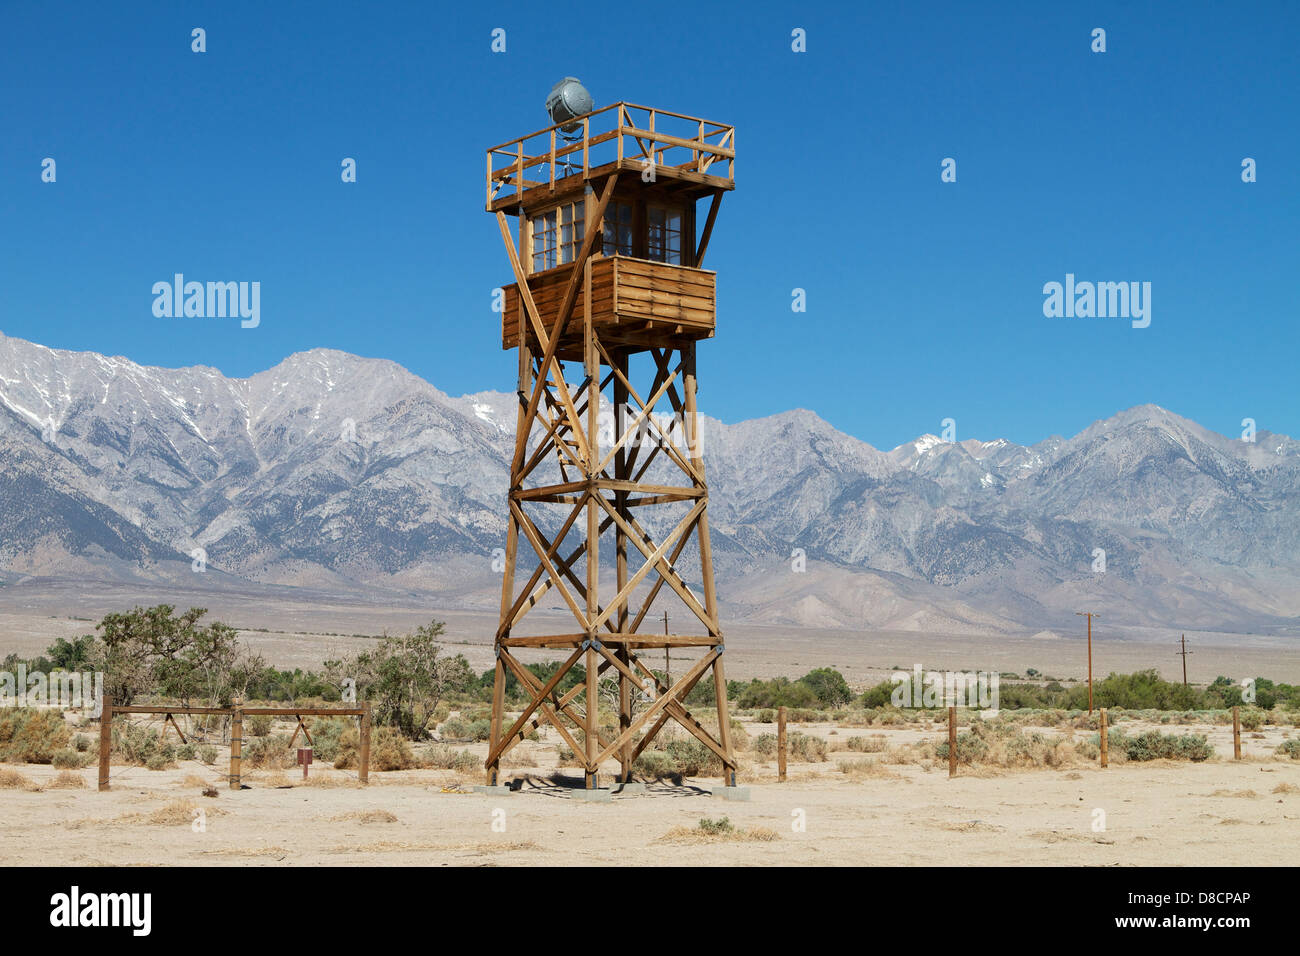 Manzanar National Historic Site War Relocation Center for Japanese American citizens and resident Japanese aliens WW2 internment camp . Stock Photo